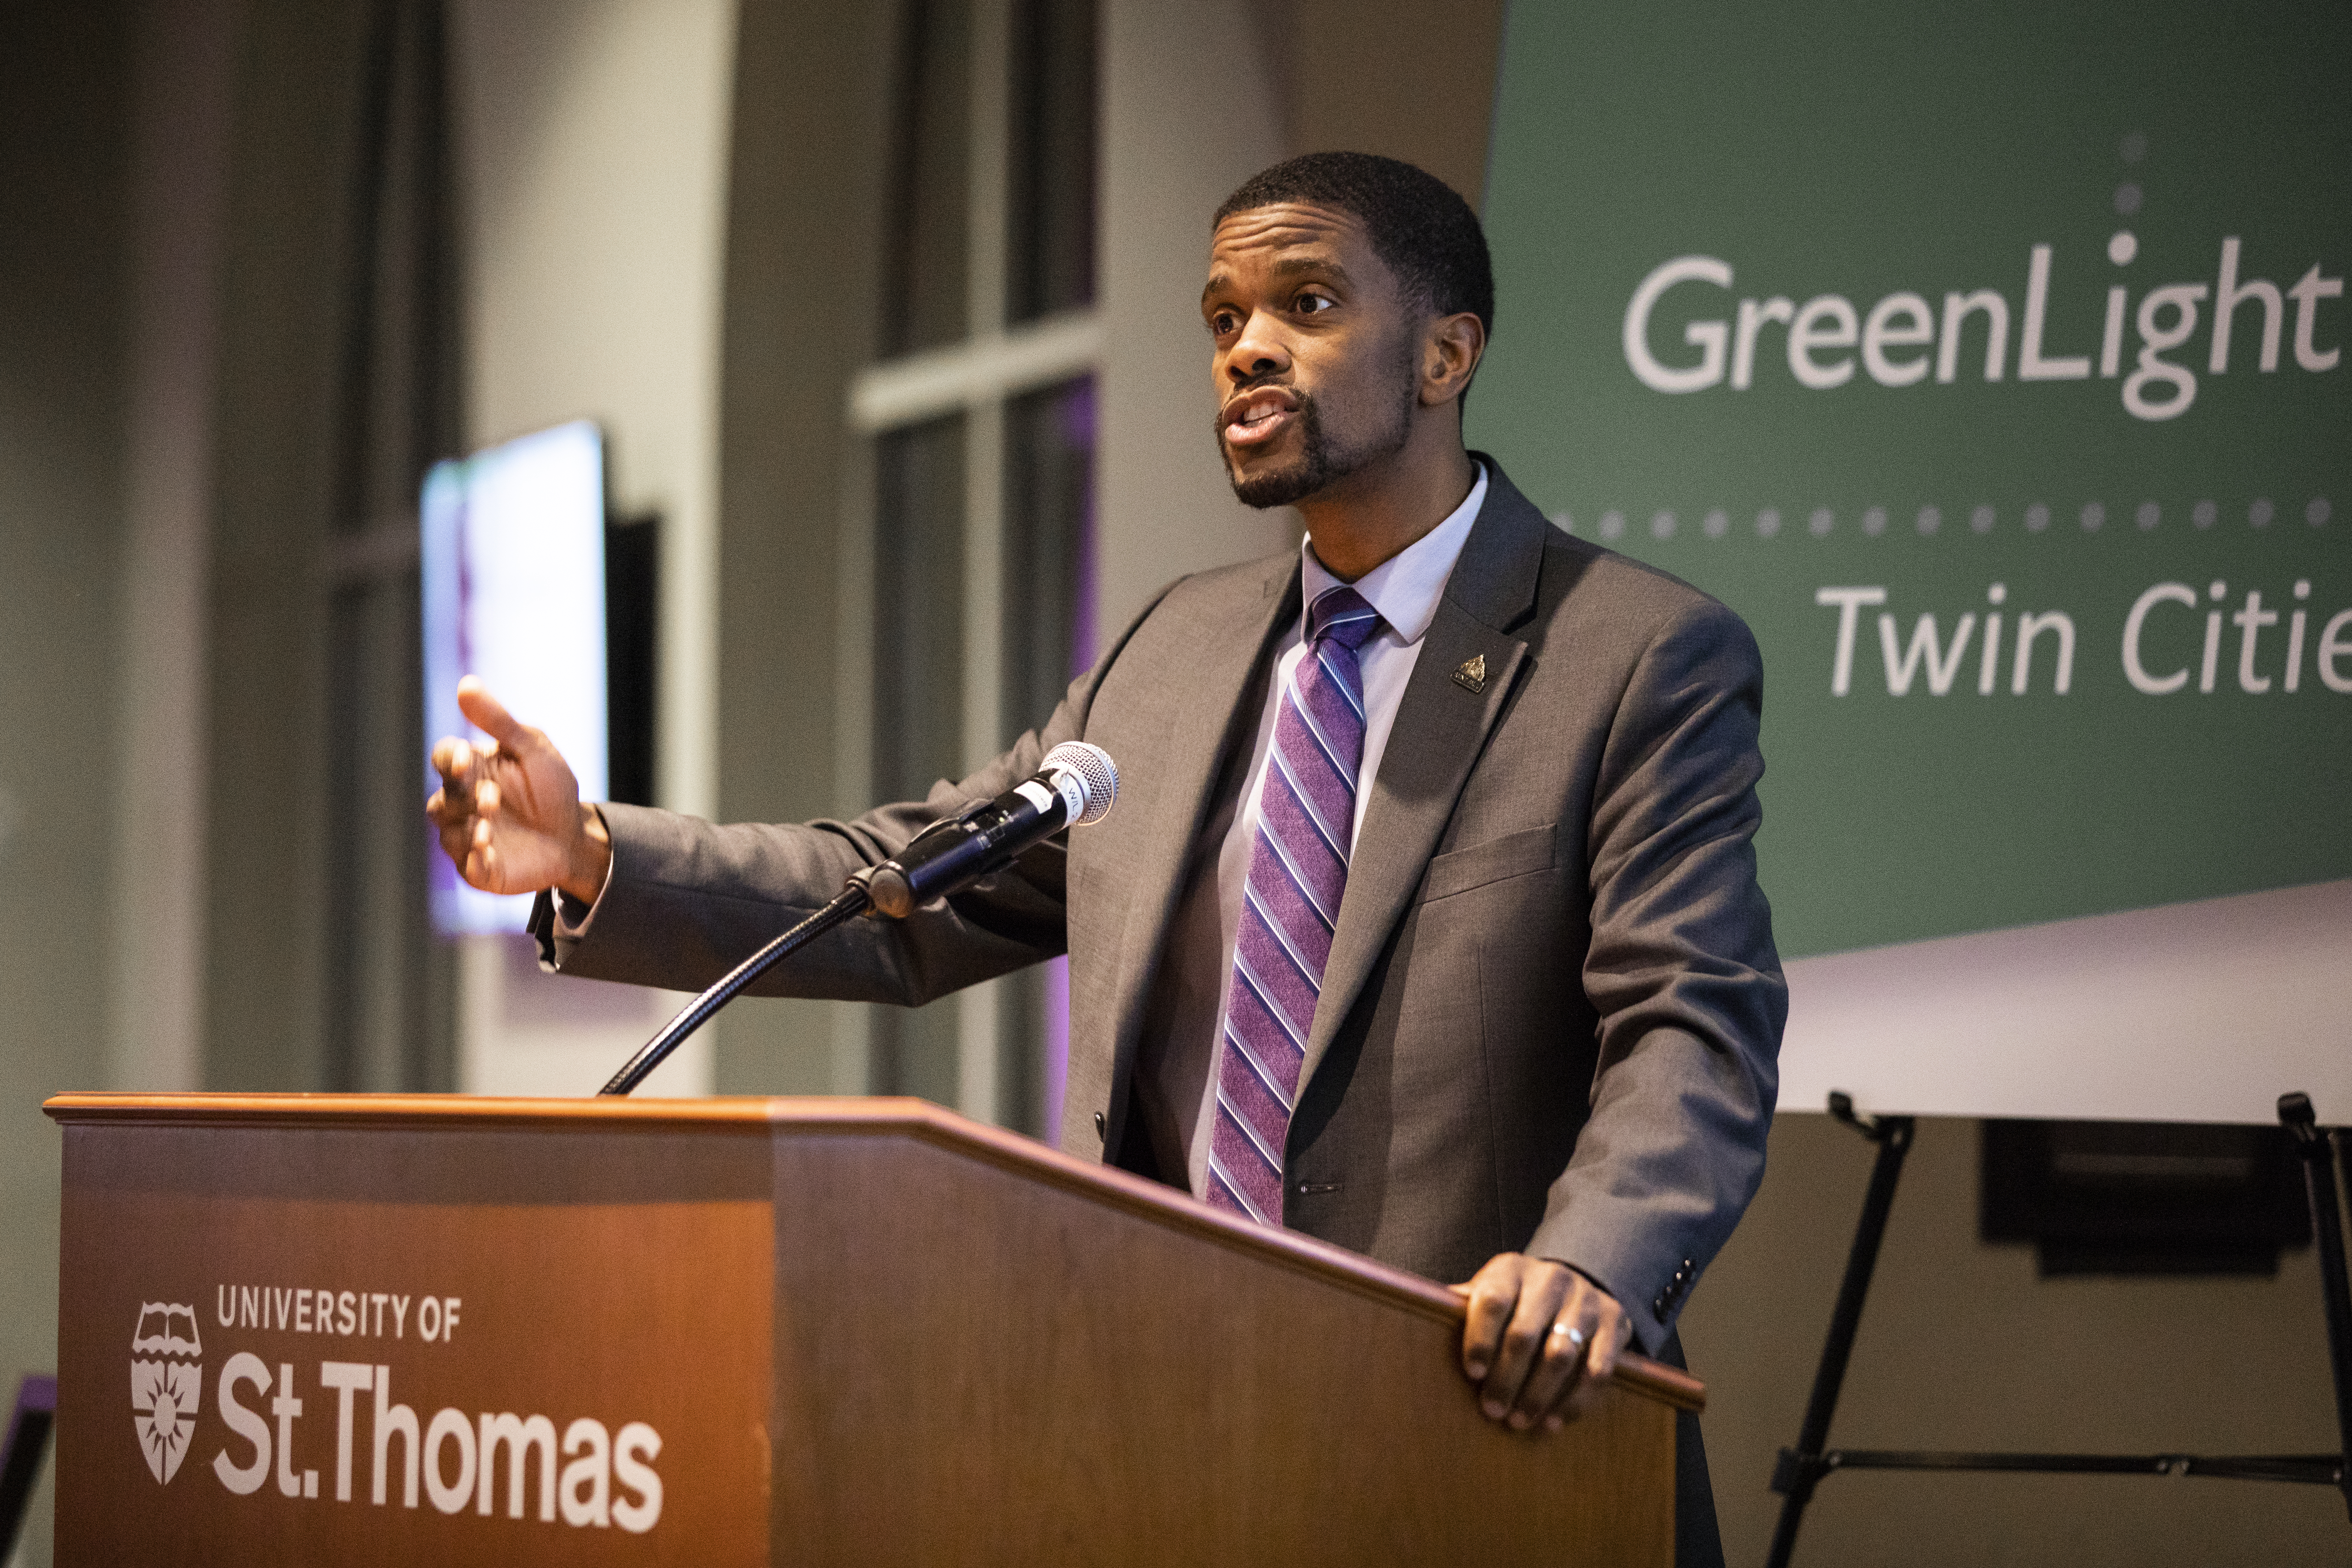 St. Paul Mayor Melvin Carter speaks Tuesday in Anderson Student Center during the launch of GreenLight Twin Cities.